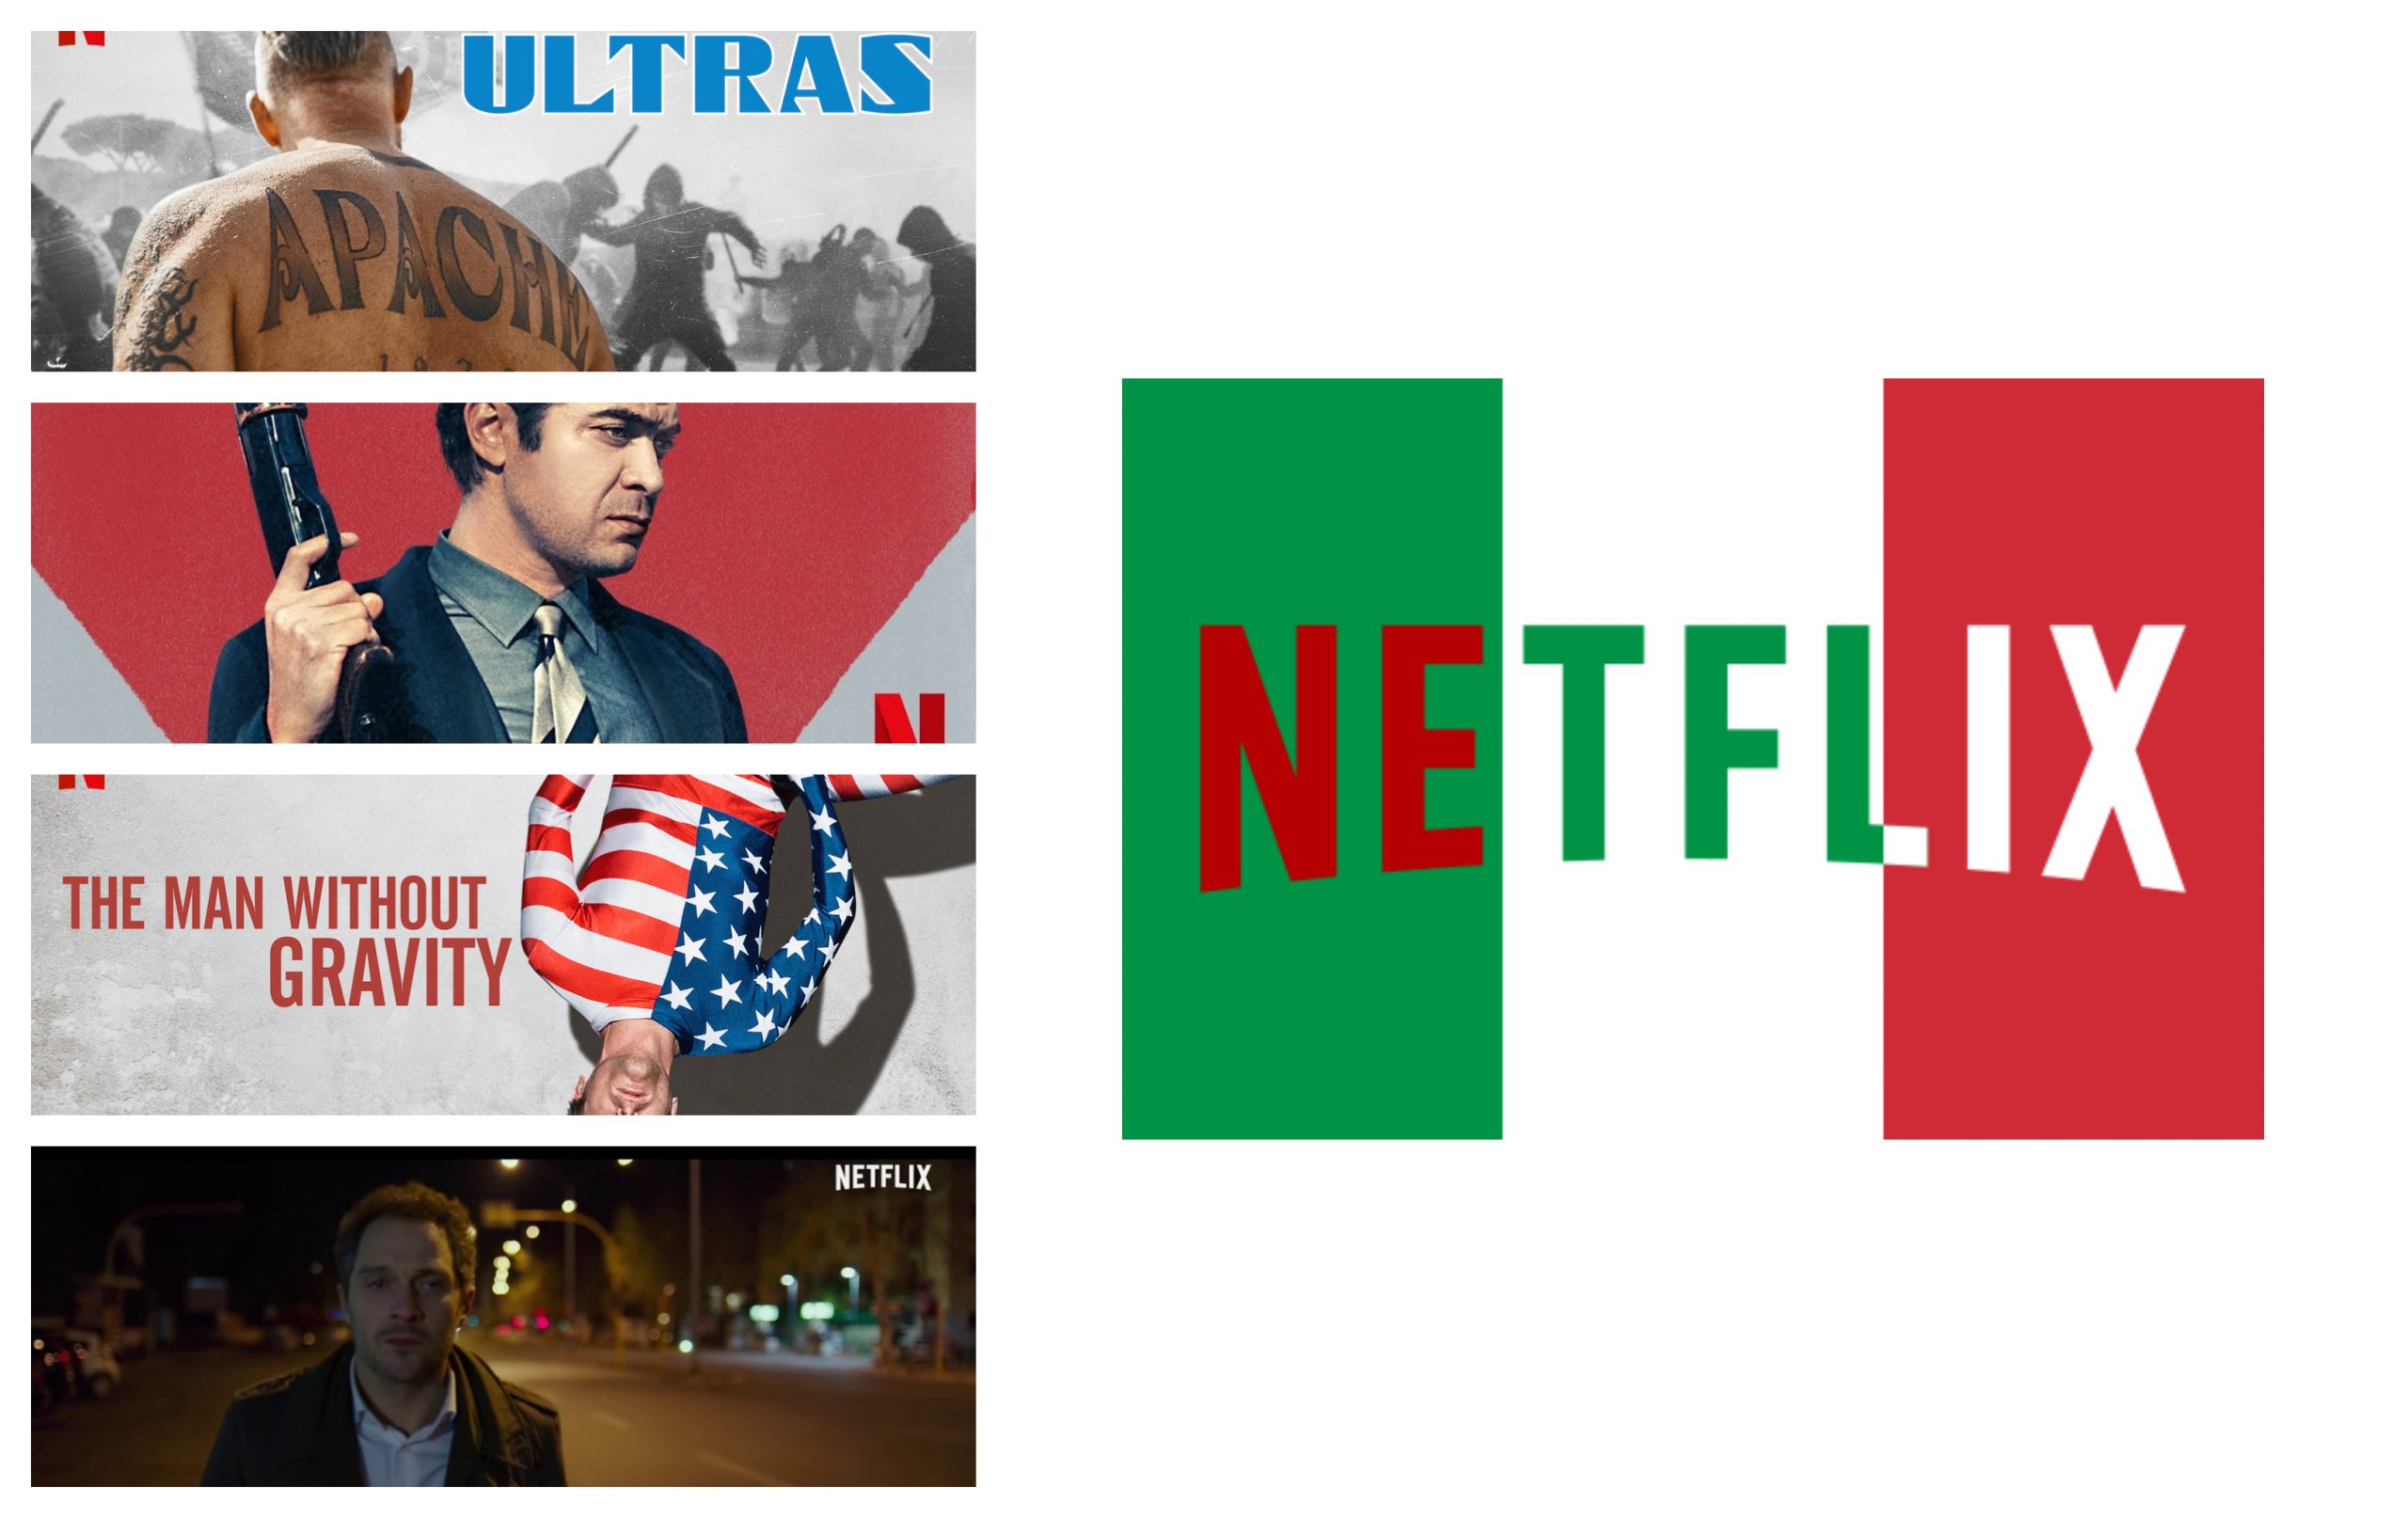 Are you looking for Italian Movies on Netflix? Then In this Article you will see the List of Italian Movies on Netflix like Ultras (2020), The Ruthless